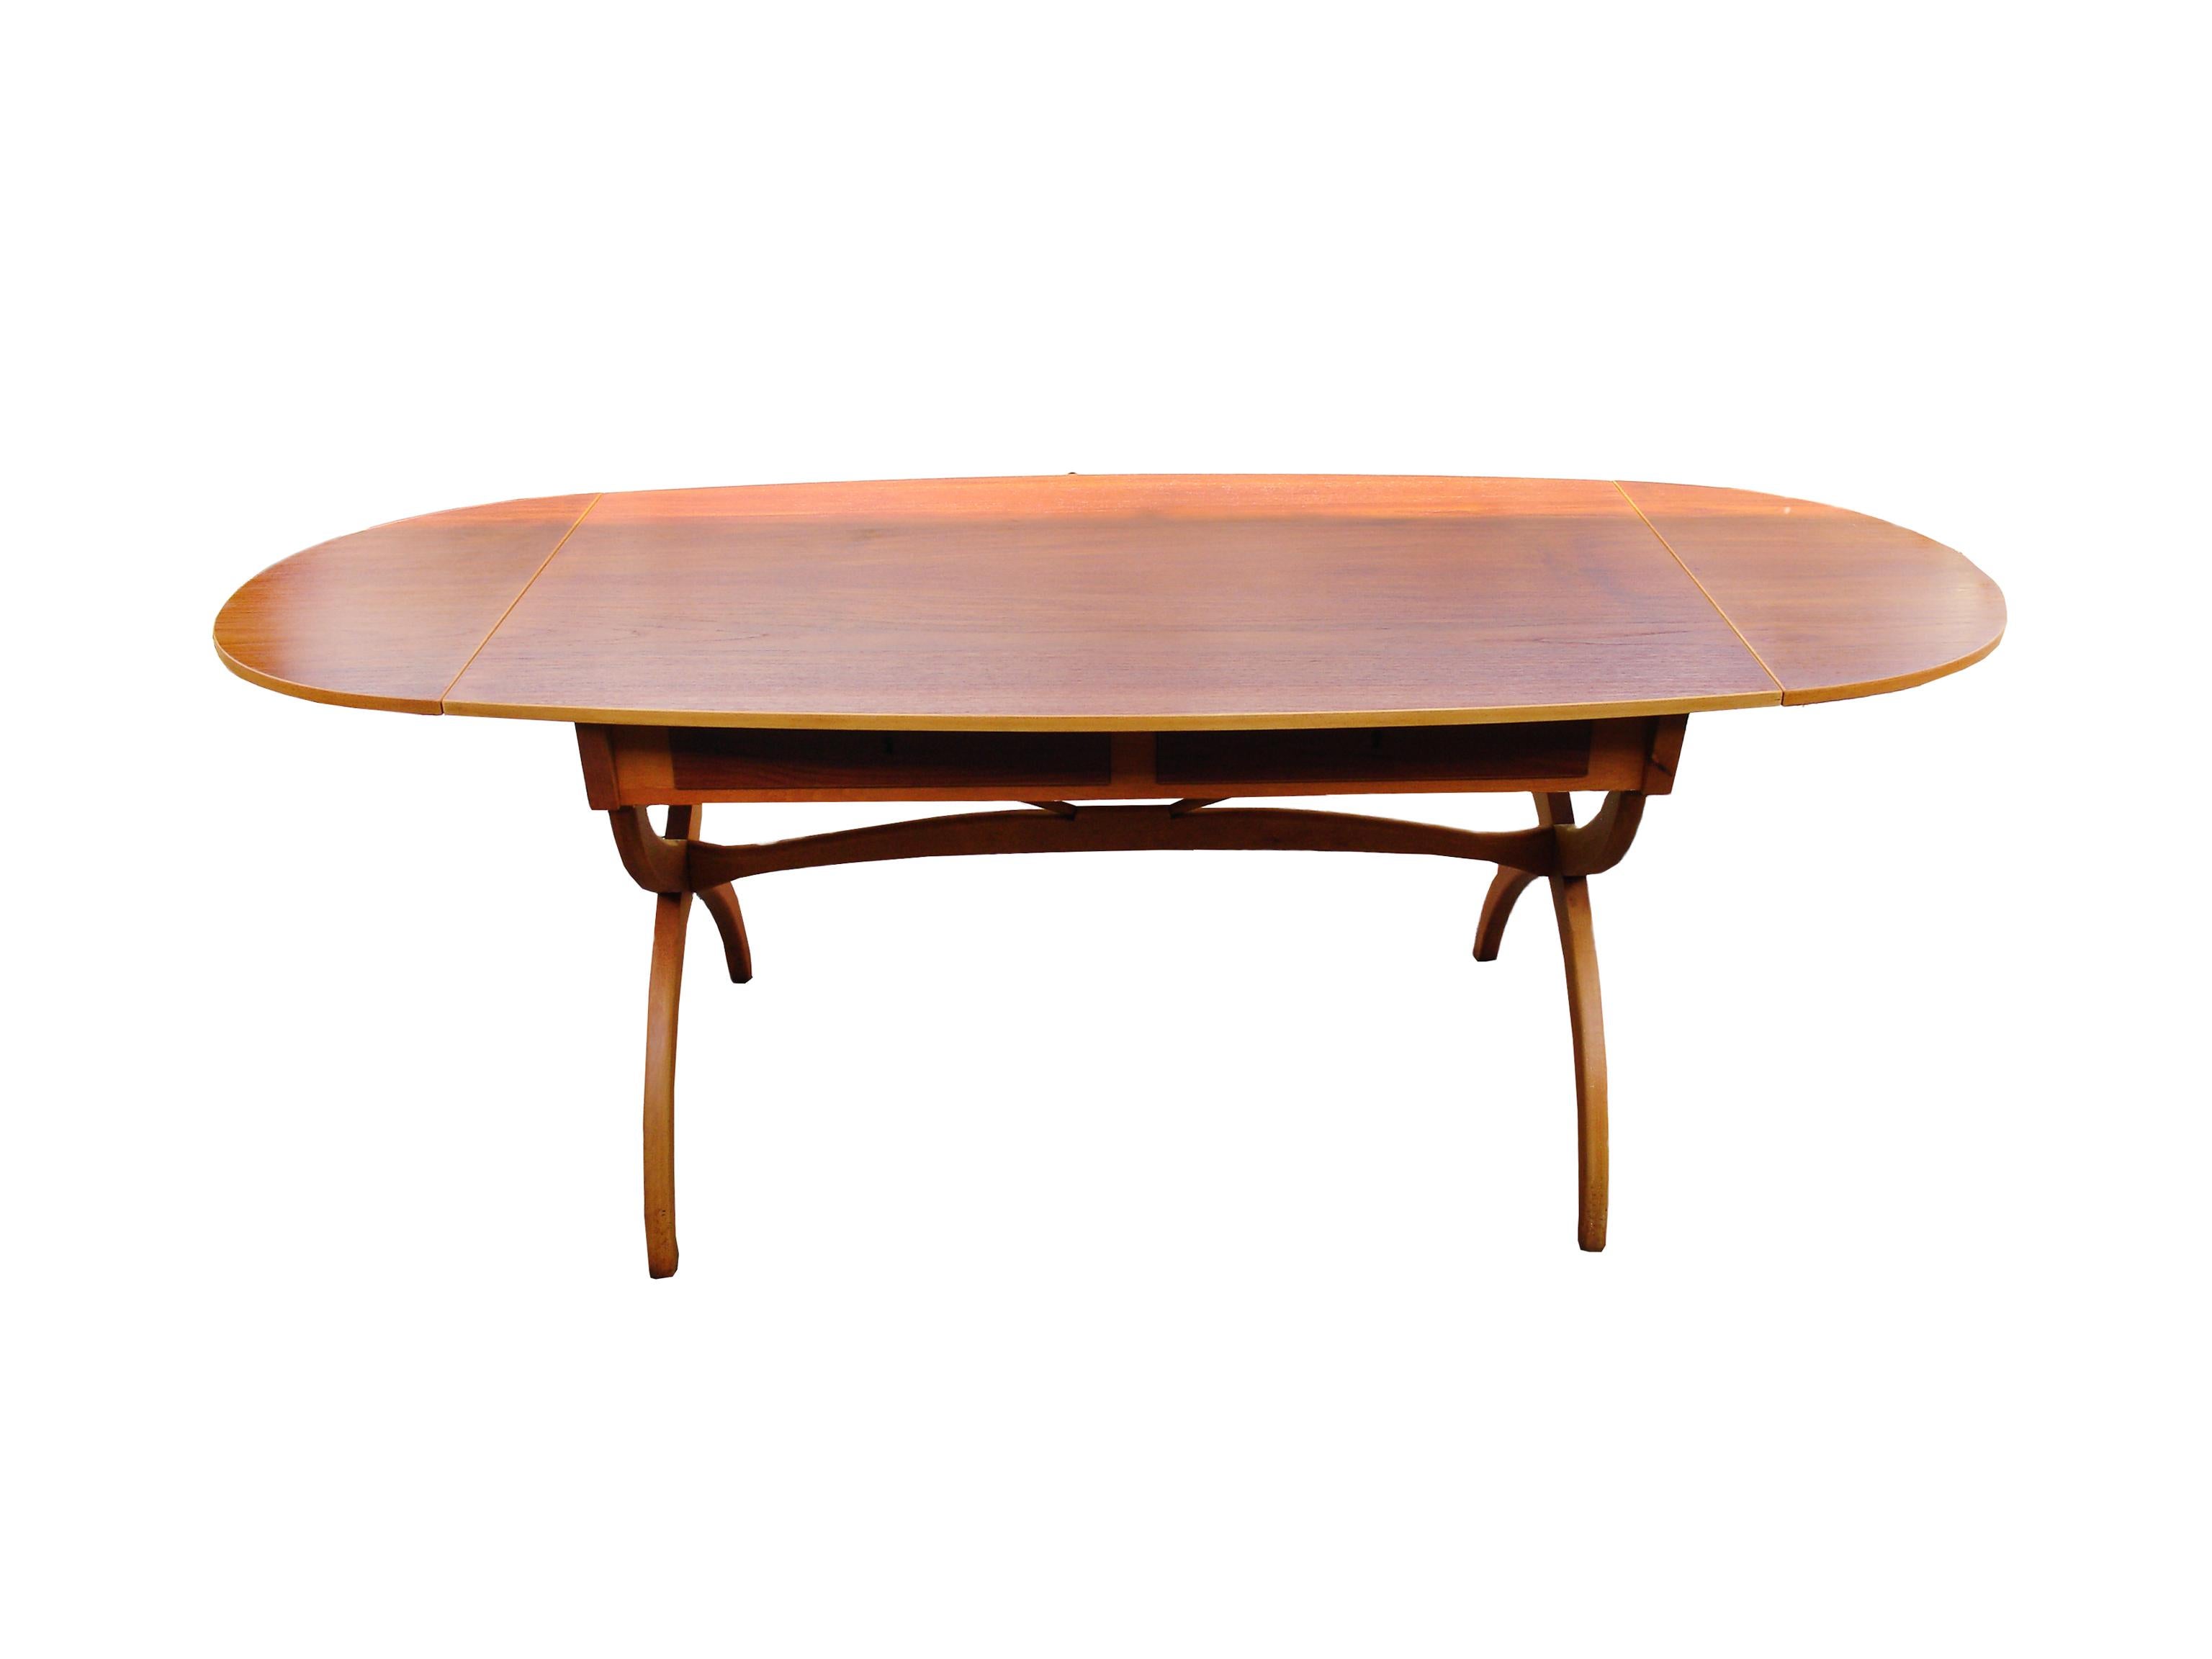 Danish modernism oval free-standing office desk or dining table by Børge Mogensen, made of fined teak top and beech frame, fitted with drop-leaves on each side, front with two drawers including original keys.
Desk features two 38 cm drop-leaf,